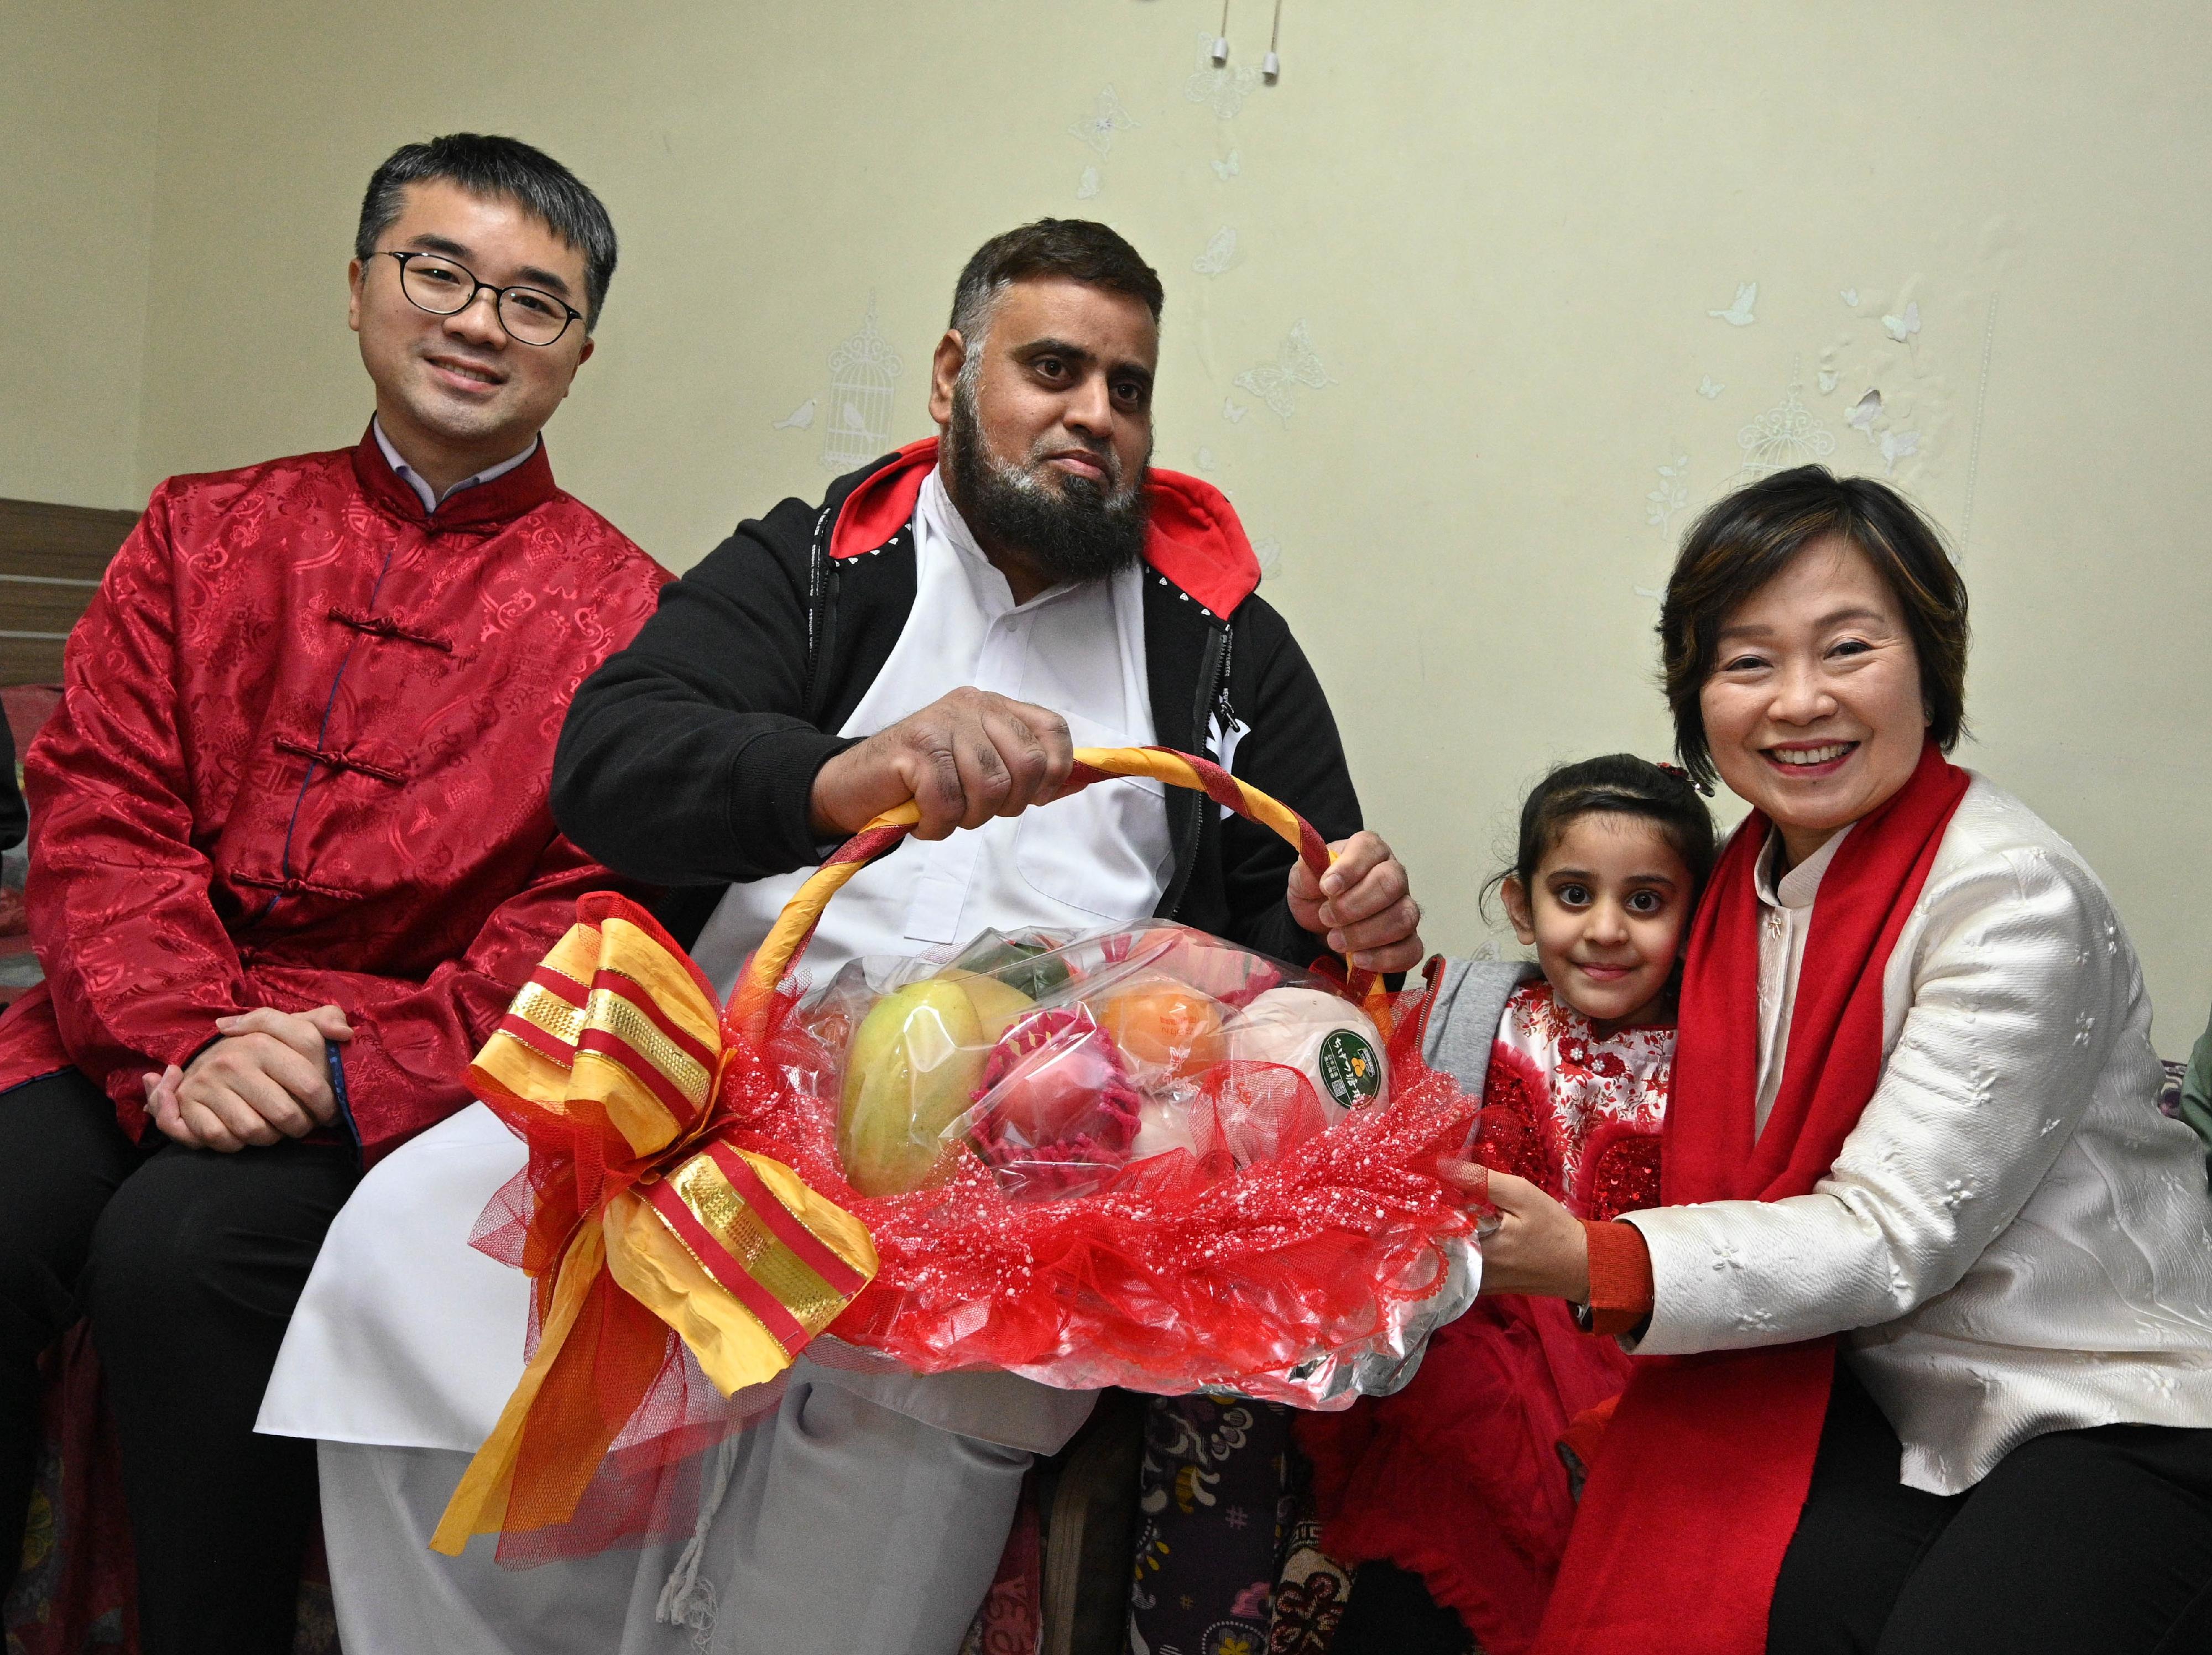 The Secretary for Education, Dr Choi Yuk-lin (first right), and the Under Secretary for Education, Mr Sze Chun-fai (first left), today (February 9) visit a Pakistani family living in Shek Wai Kok Estate, Tsuen Wan, to present a fruit hamper and extend blessings to them in celebration of the Chinese New Year.